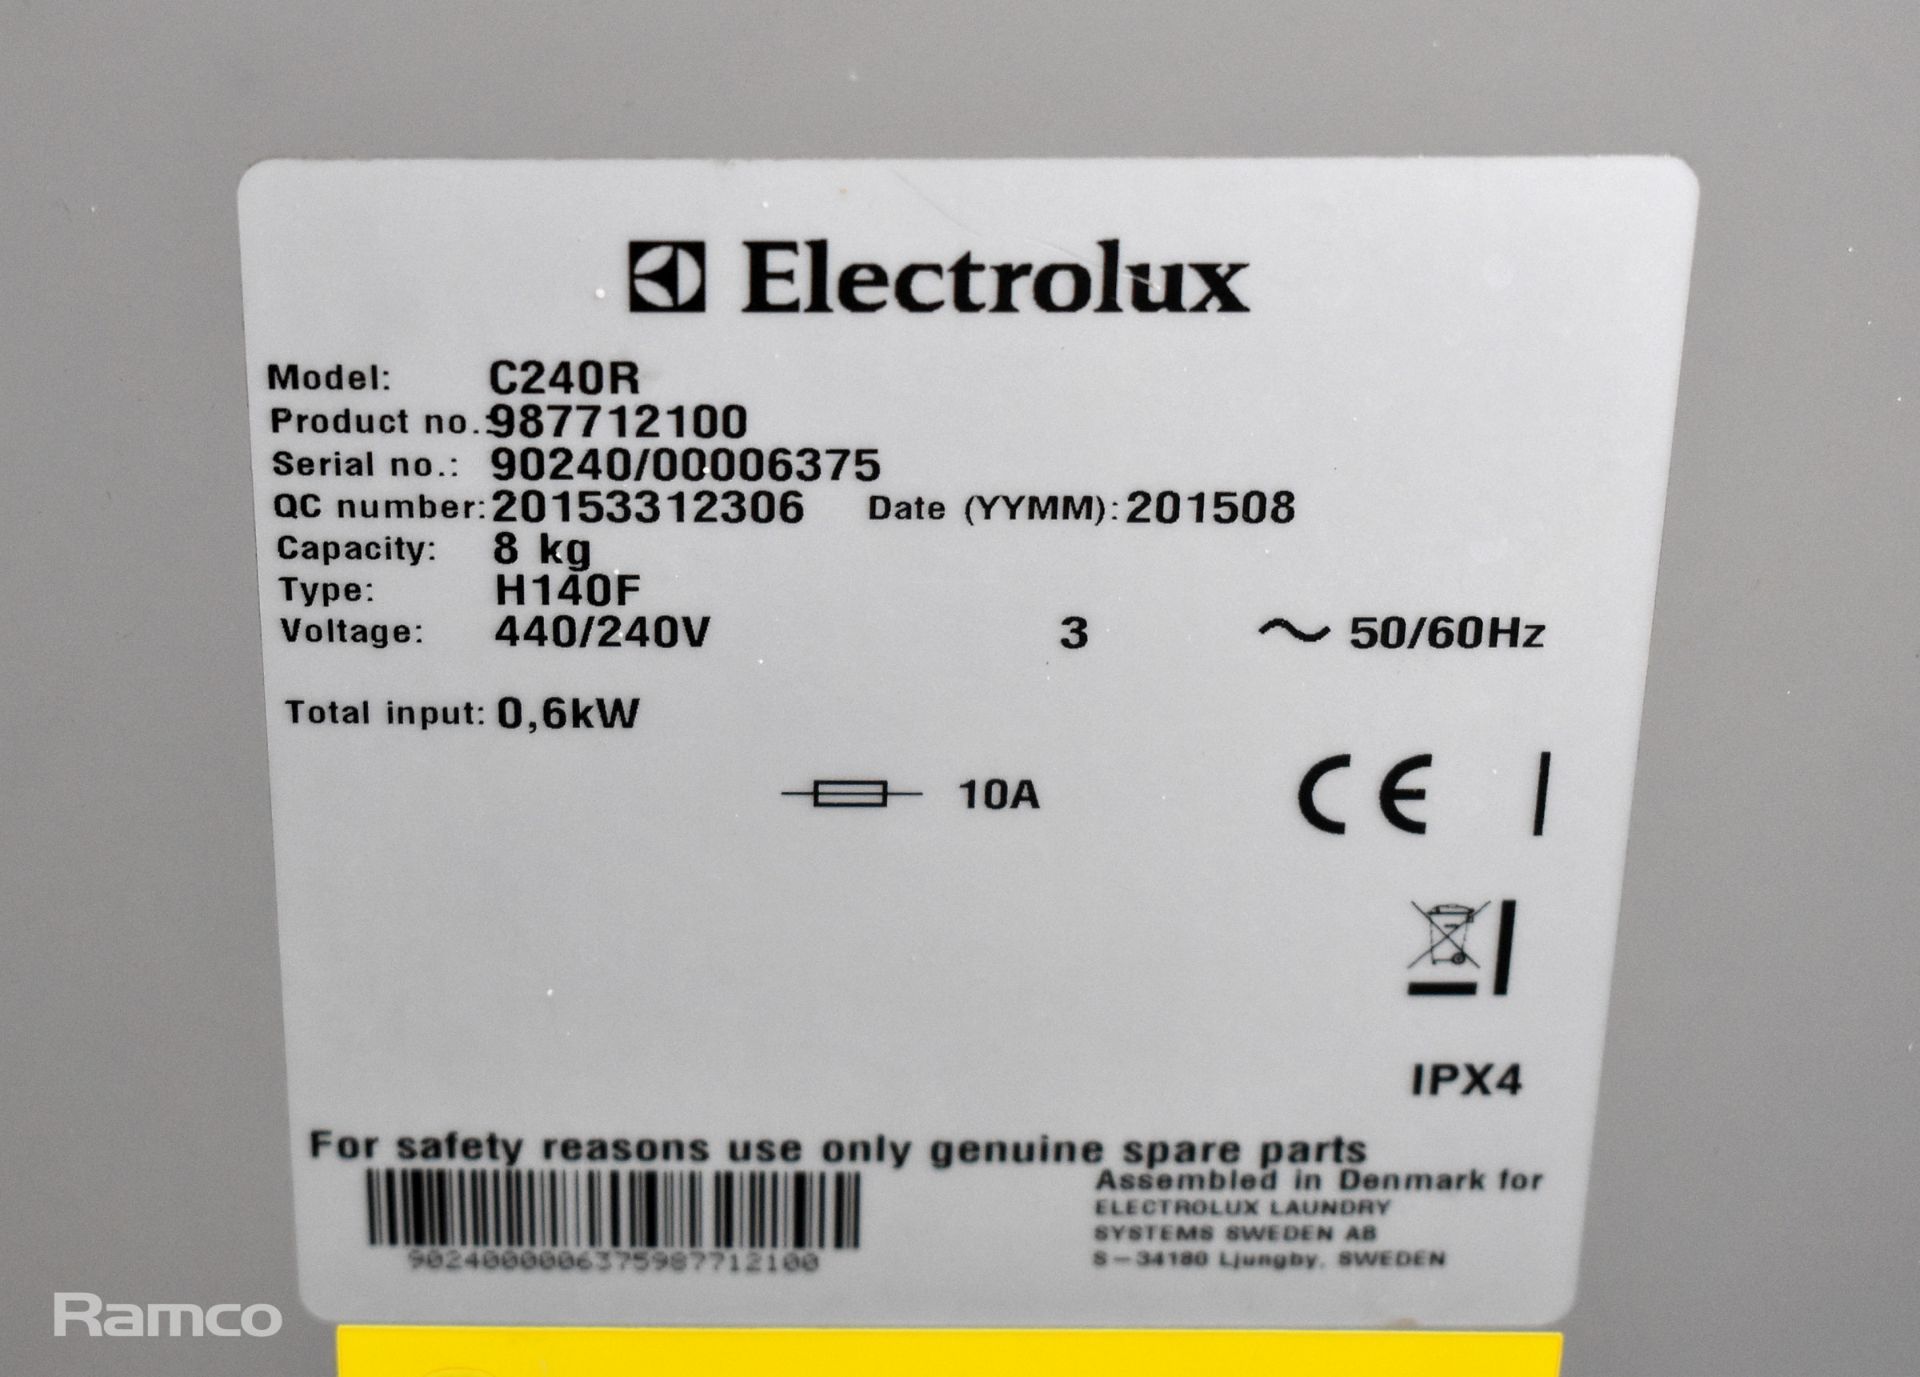 Electrolux C240R 8kg hydro extractor - W 515 x D 660 x H 910mm - MISSING BOTTOM COVER - Image 6 of 6